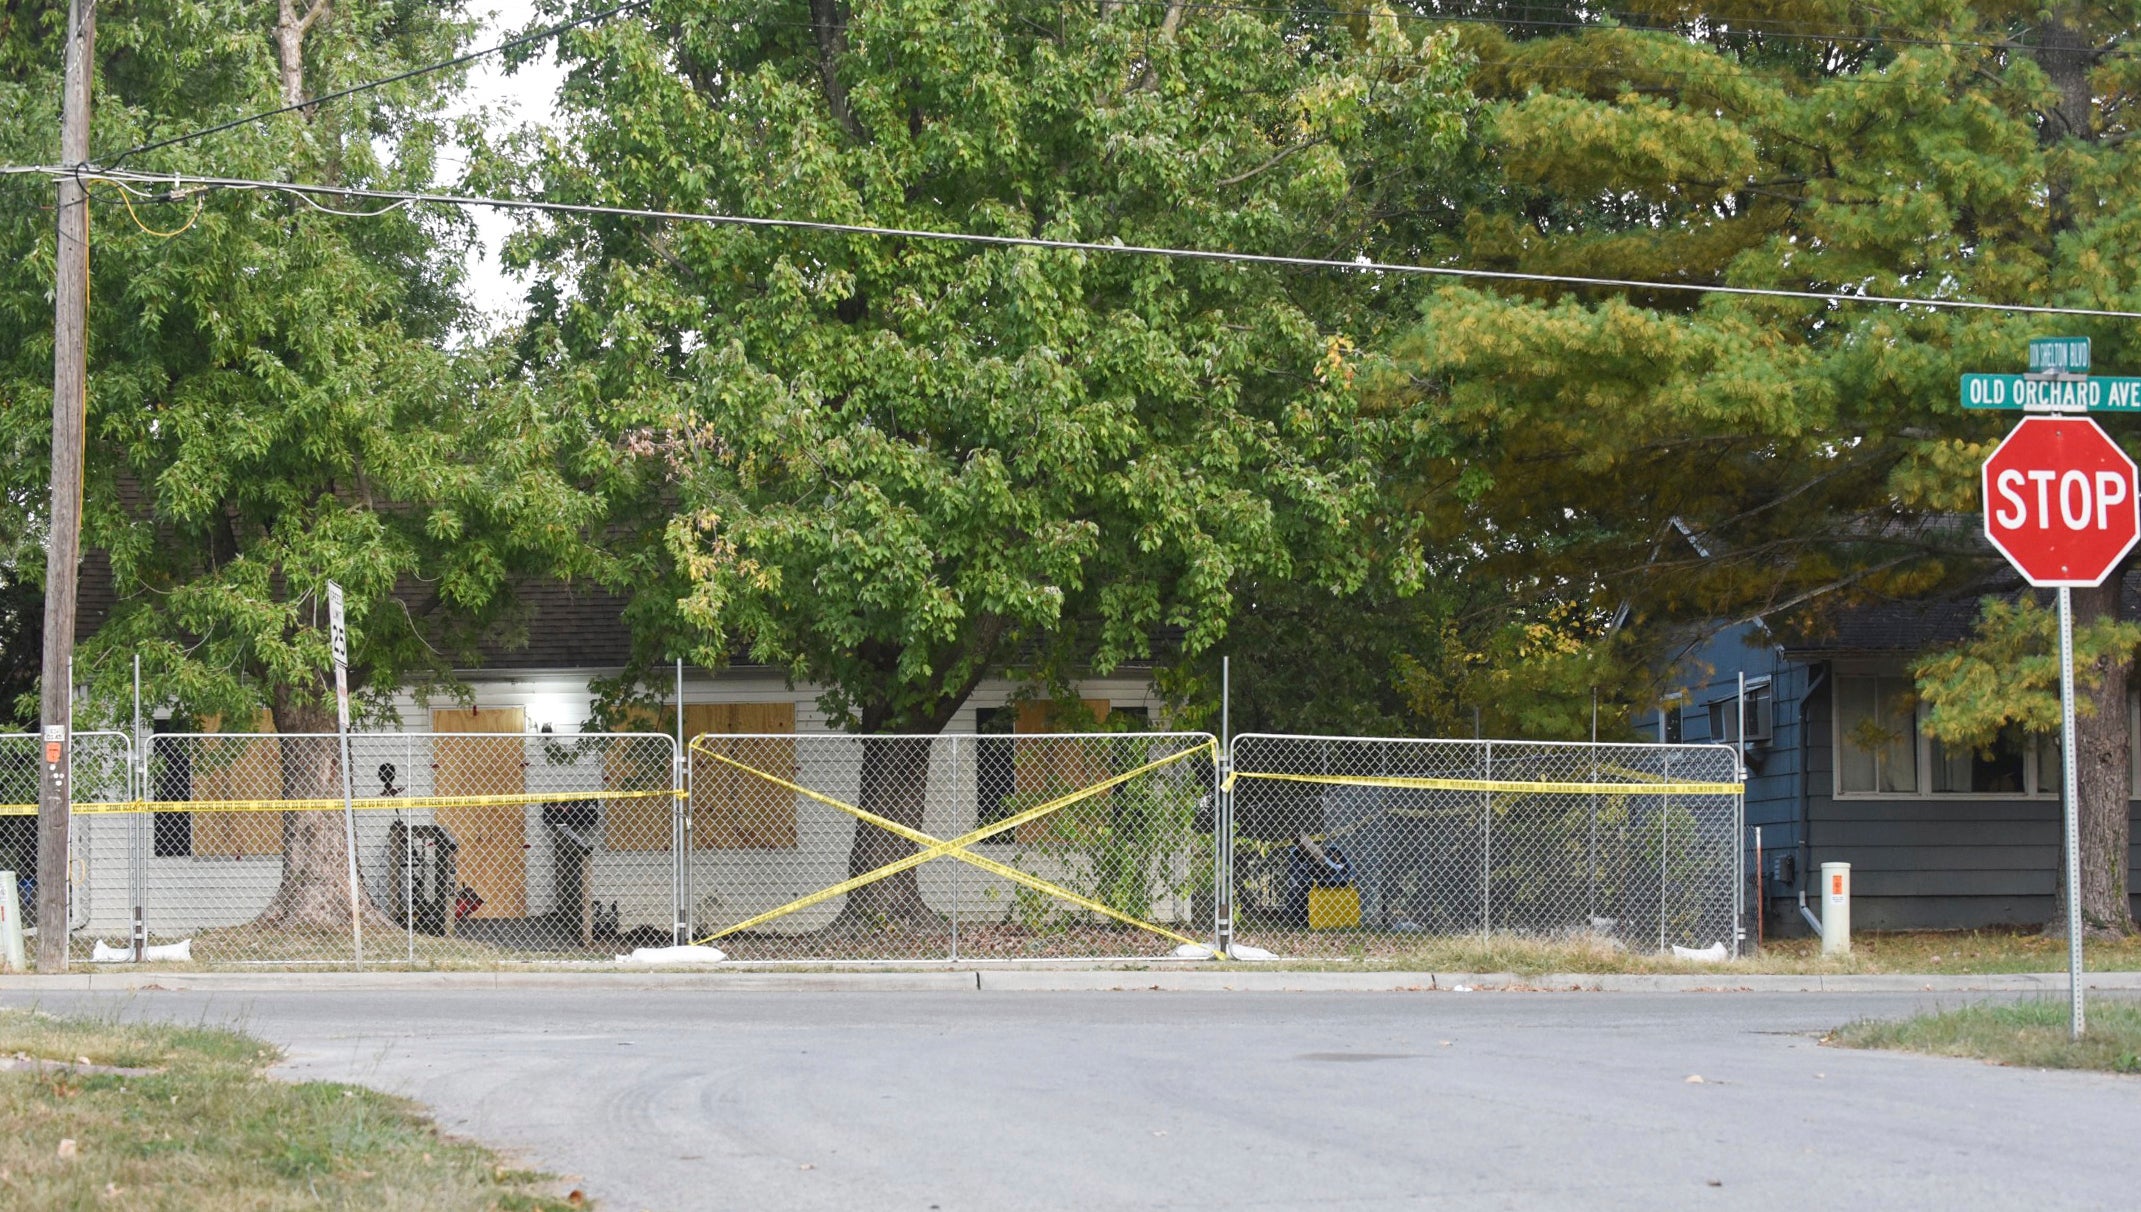 Police tape blocks off the residence of Timothy M Haslett Jr, after the home was boarded up and fenced off Monday, 10 October 2022, in Missouri’s Excelsior Springs city